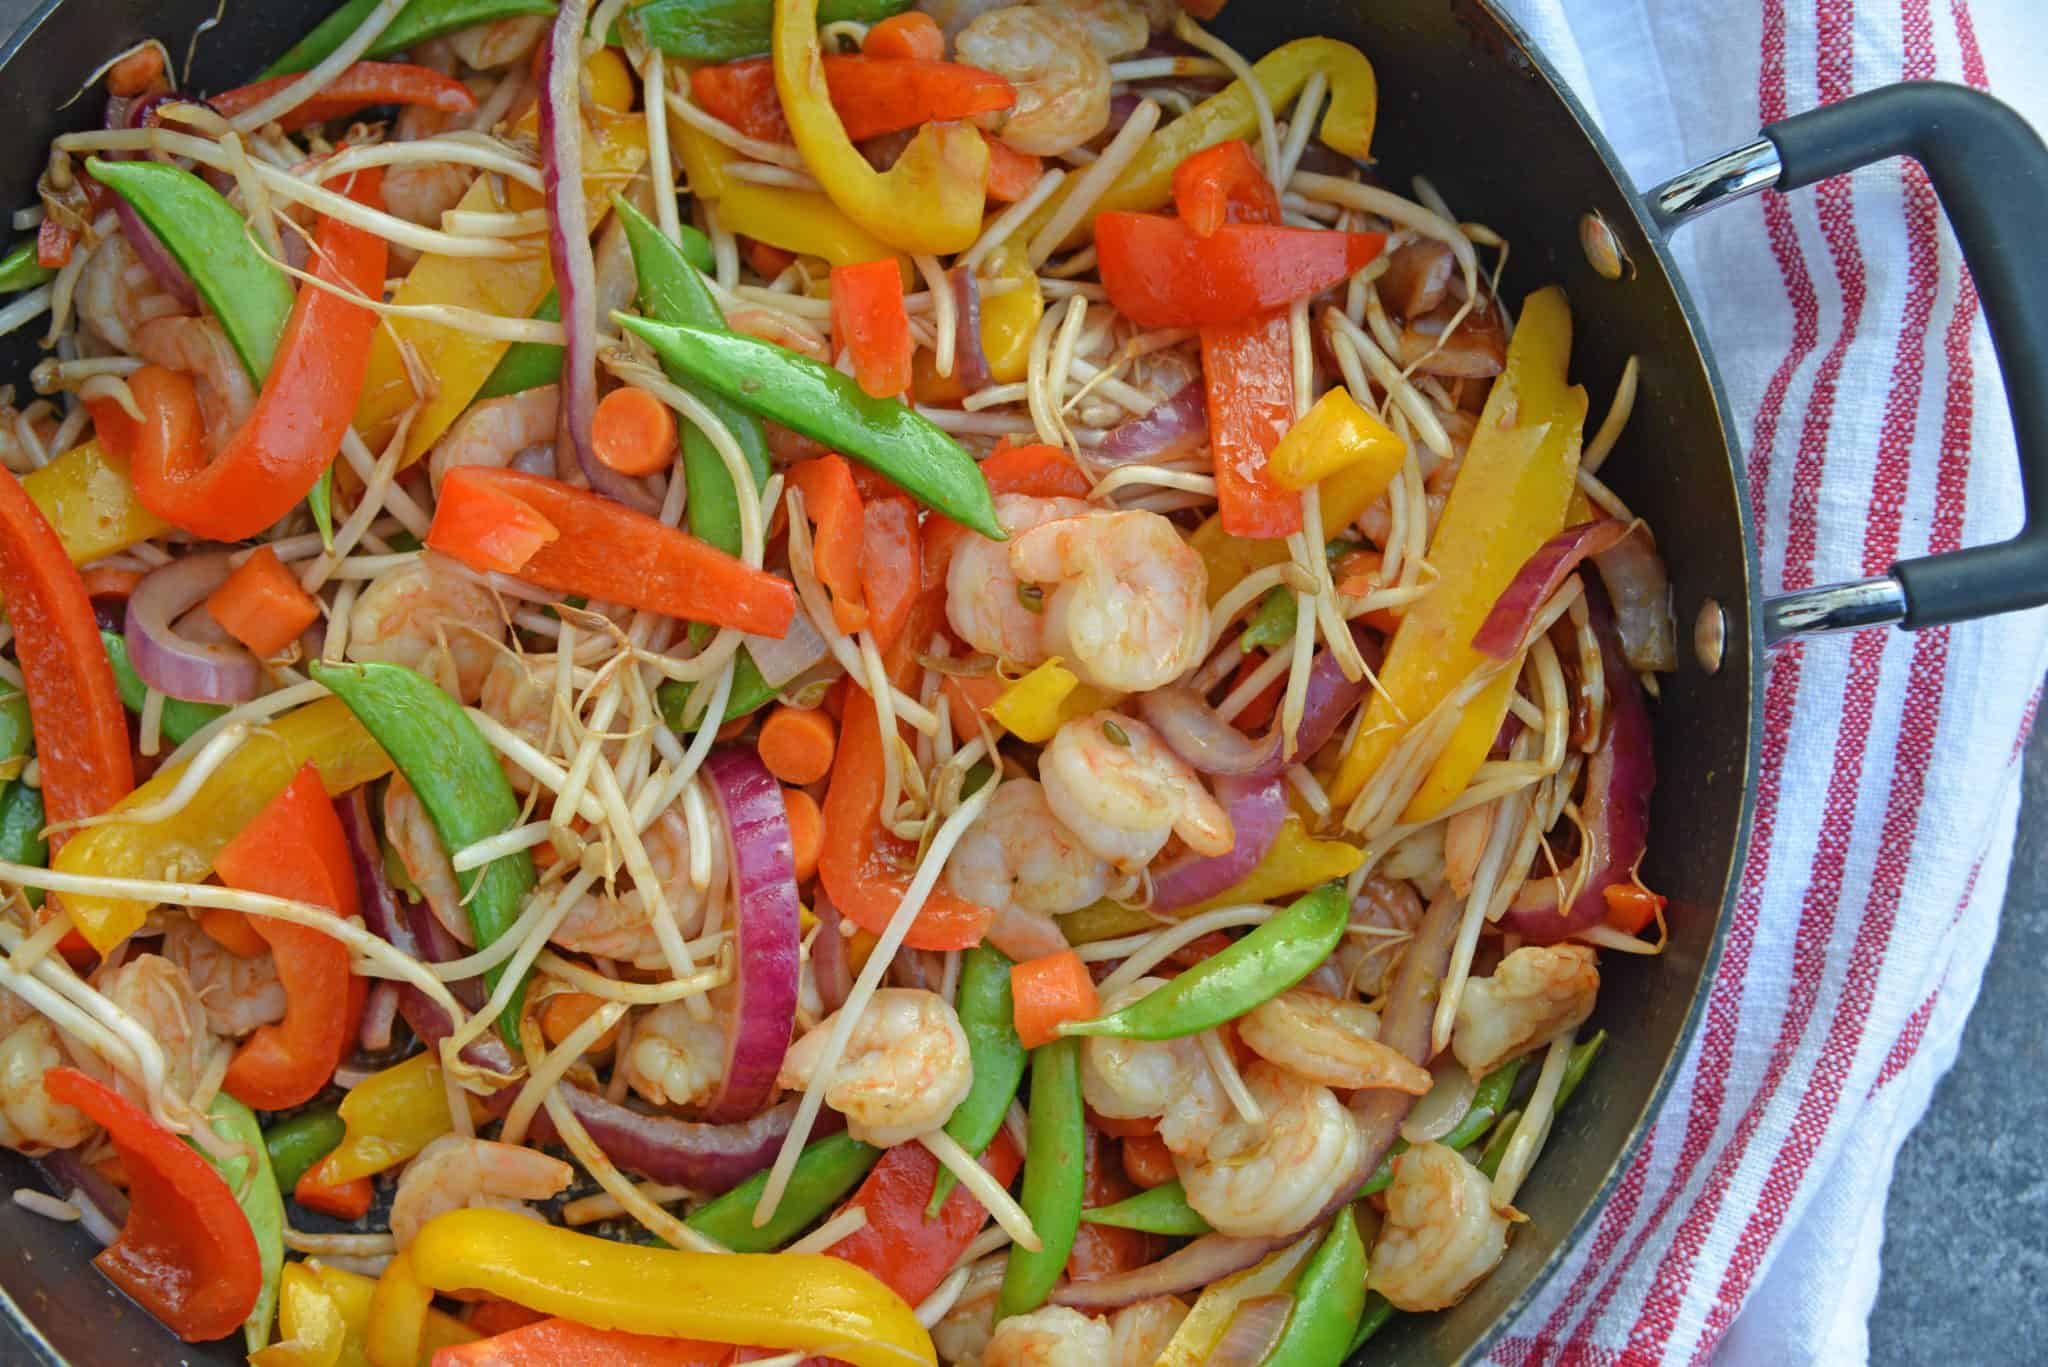 Skip the takeout and make this easy Teriyaki Shrimp Stir Fry instead! This Shrimp Stir Fry is an easy weeknight meal that the whole family will love! Best served with fried rice or noodles and packed full of veggies, this healthy recipe is sure to be a hit! #shrimpstirfry #teriyakirecipes #recipesthatuseteriyakisauce #teriyakishrimpstirfry #savoryexperiments 